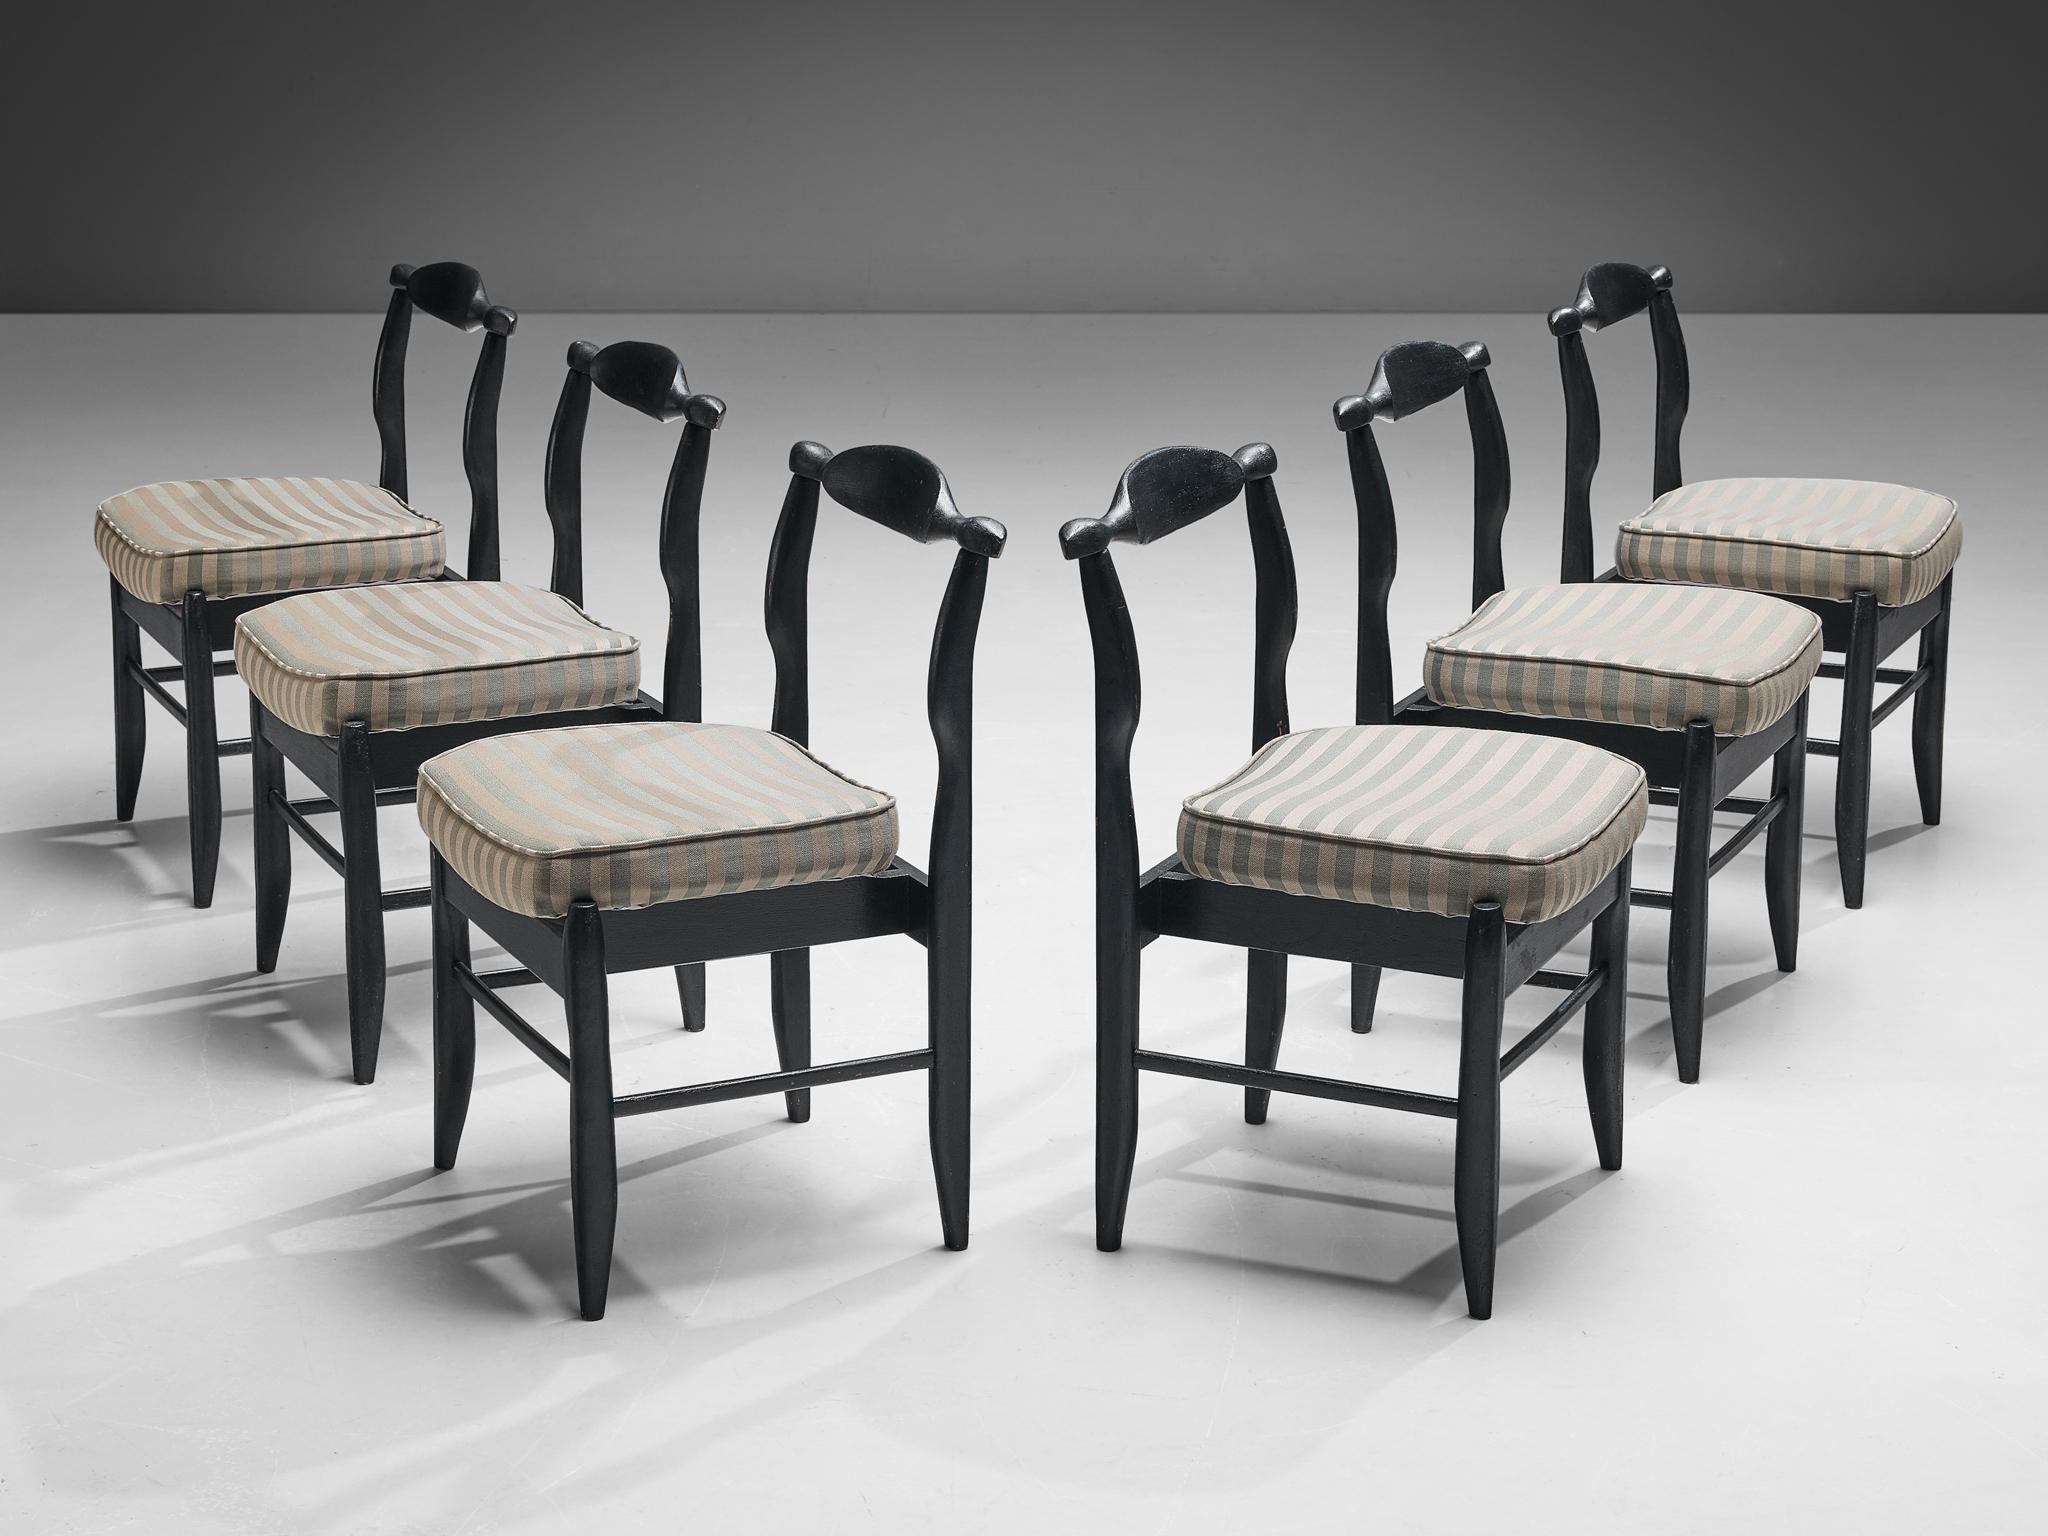 Guillerme et Chambron for Votre Maison, set of six dining chairs model 'Fumay,' stained oak, fabric, France, 1960s.

Beautifully shaped chairs in stained oak by French designer duo Jacques Chambron and Robert Guillerme. These dining chairs show